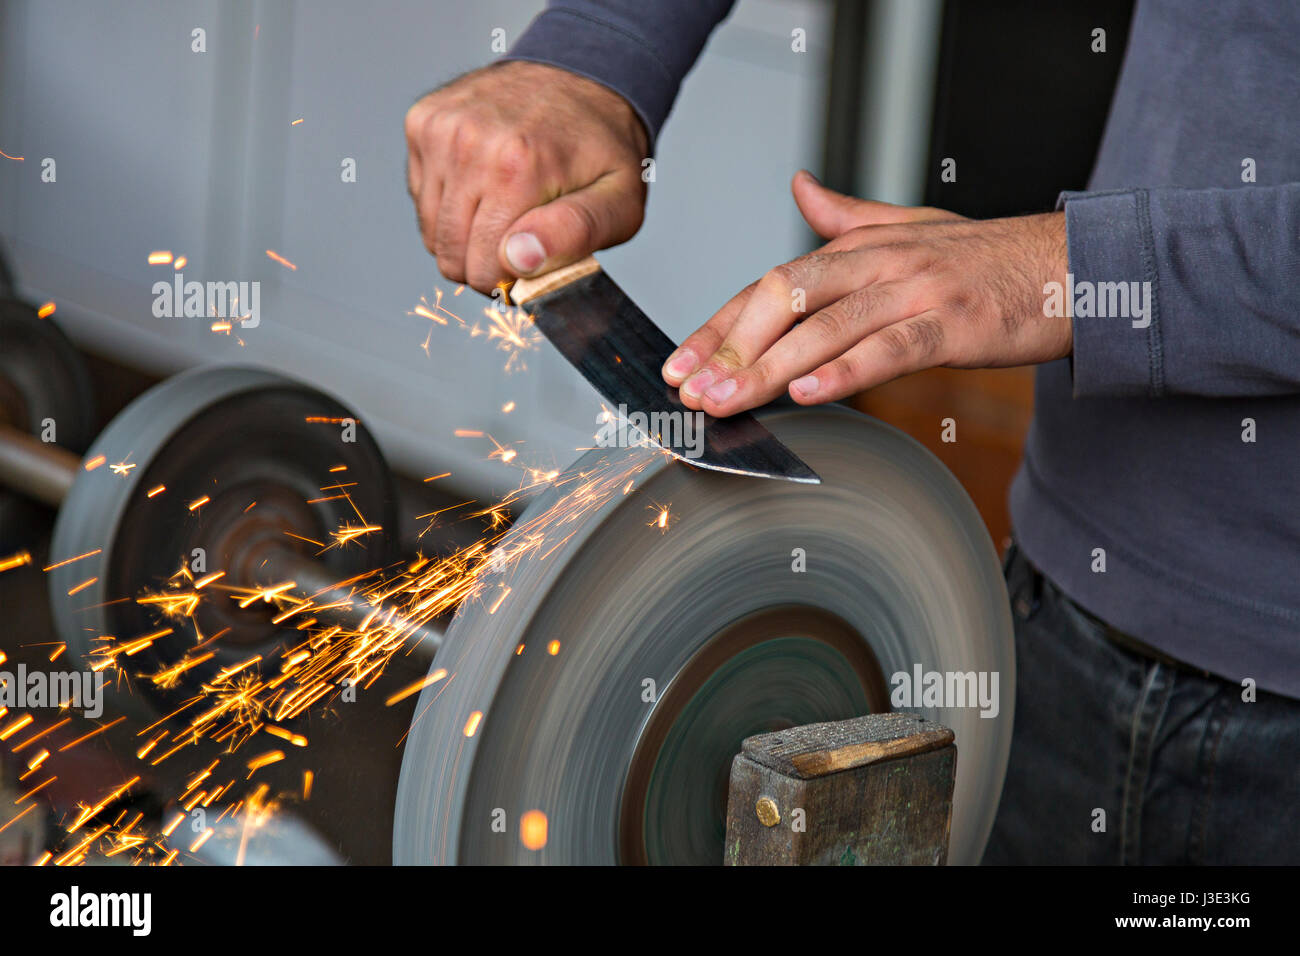 Sharpening the knife. Stock Photo